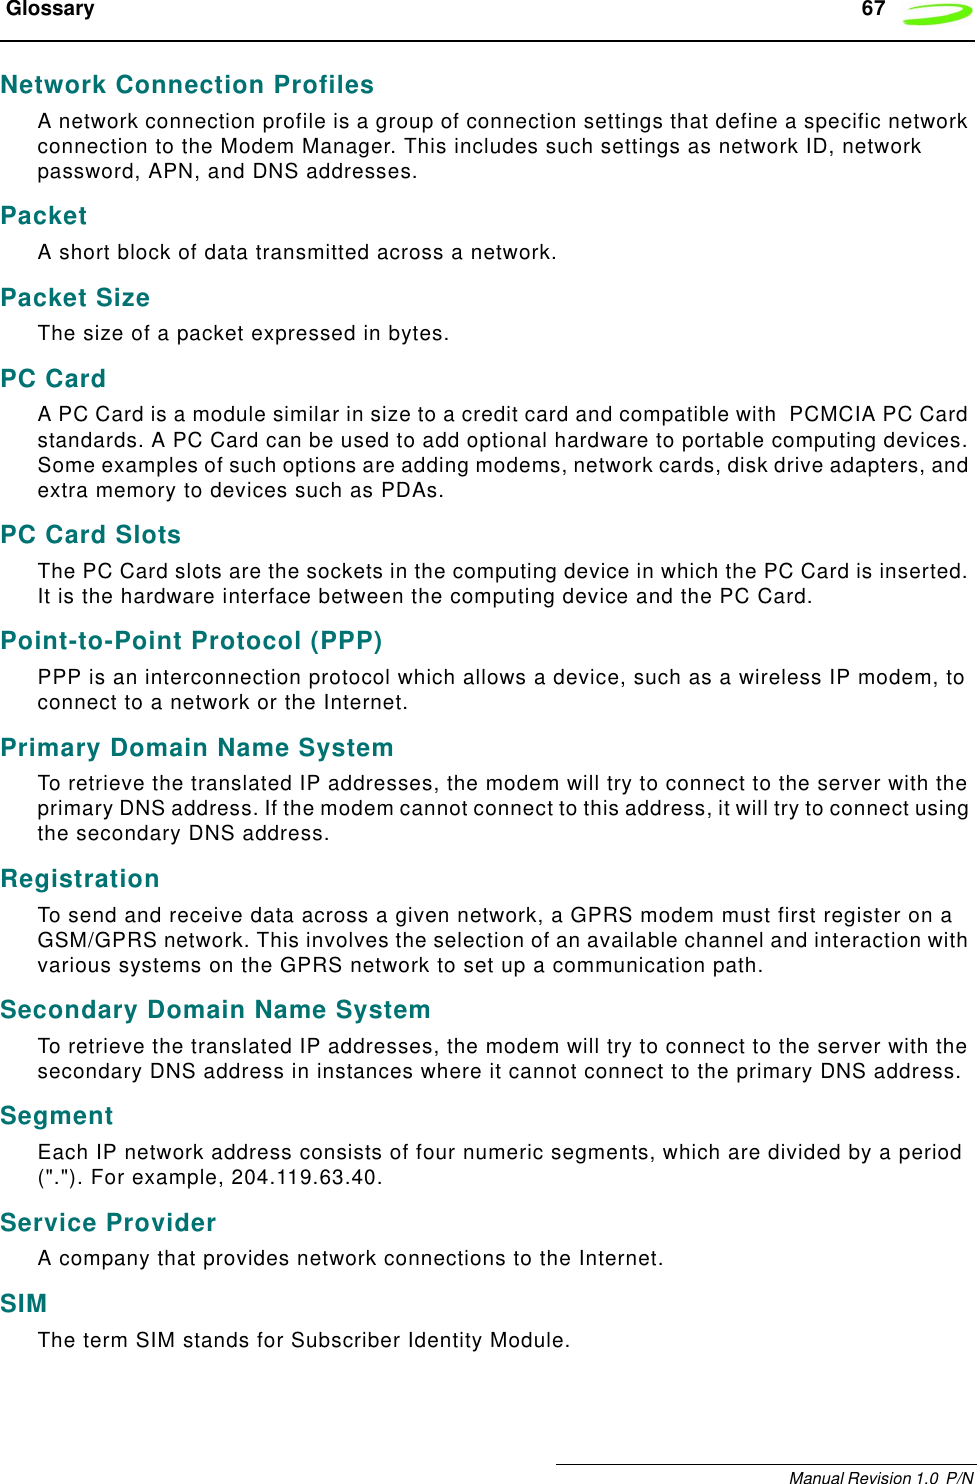  Glossary 67Manual Revision 1.0  P/N Network Connection ProfilesA network connection profile is a group of connection settings that define a specific network connection to the Modem Manager. This includes such settings as network ID, network password, APN, and DNS addresses.PacketA short block of data transmitted across a network.Packet SizeThe size of a packet expressed in bytes.PC CardA PC Card is a module similar in size to a credit card and compatible with  PCMCIA PC Card standards. A PC Card can be used to add optional hardware to portable computing devices. Some examples of such options are adding modems, network cards, disk drive adapters, and extra memory to devices such as PDAs.PC Card SlotsThe PC Card slots are the sockets in the computing device in which the PC Card is inserted. It is the hardware interface between the computing device and the PC Card.Point-to-Point Protocol (PPP)PPP is an interconnection protocol which allows a device, such as a wireless IP modem, to connect to a network or the Internet.Primary Domain Name SystemTo retrieve the translated IP addresses, the modem will try to connect to the server with the primary DNS address. If the modem cannot connect to this address, it will try to connect using the secondary DNS address.RegistrationTo send and receive data across a given network, a GPRS modem must first register on a GSM/GPRS network. This involves the selection of an available channel and interaction with various systems on the GPRS network to set up a communication path.Secondary Domain Name SystemTo retrieve the translated IP addresses, the modem will try to connect to the server with the secondary DNS address in instances where it cannot connect to the primary DNS address.SegmentEach IP network address consists of four numeric segments, which are divided by a period (&quot;.&quot;). For example, 204.119.63.40.Service ProviderA company that provides network connections to the Internet.SIMThe term SIM stands for Subscriber Identity Module.